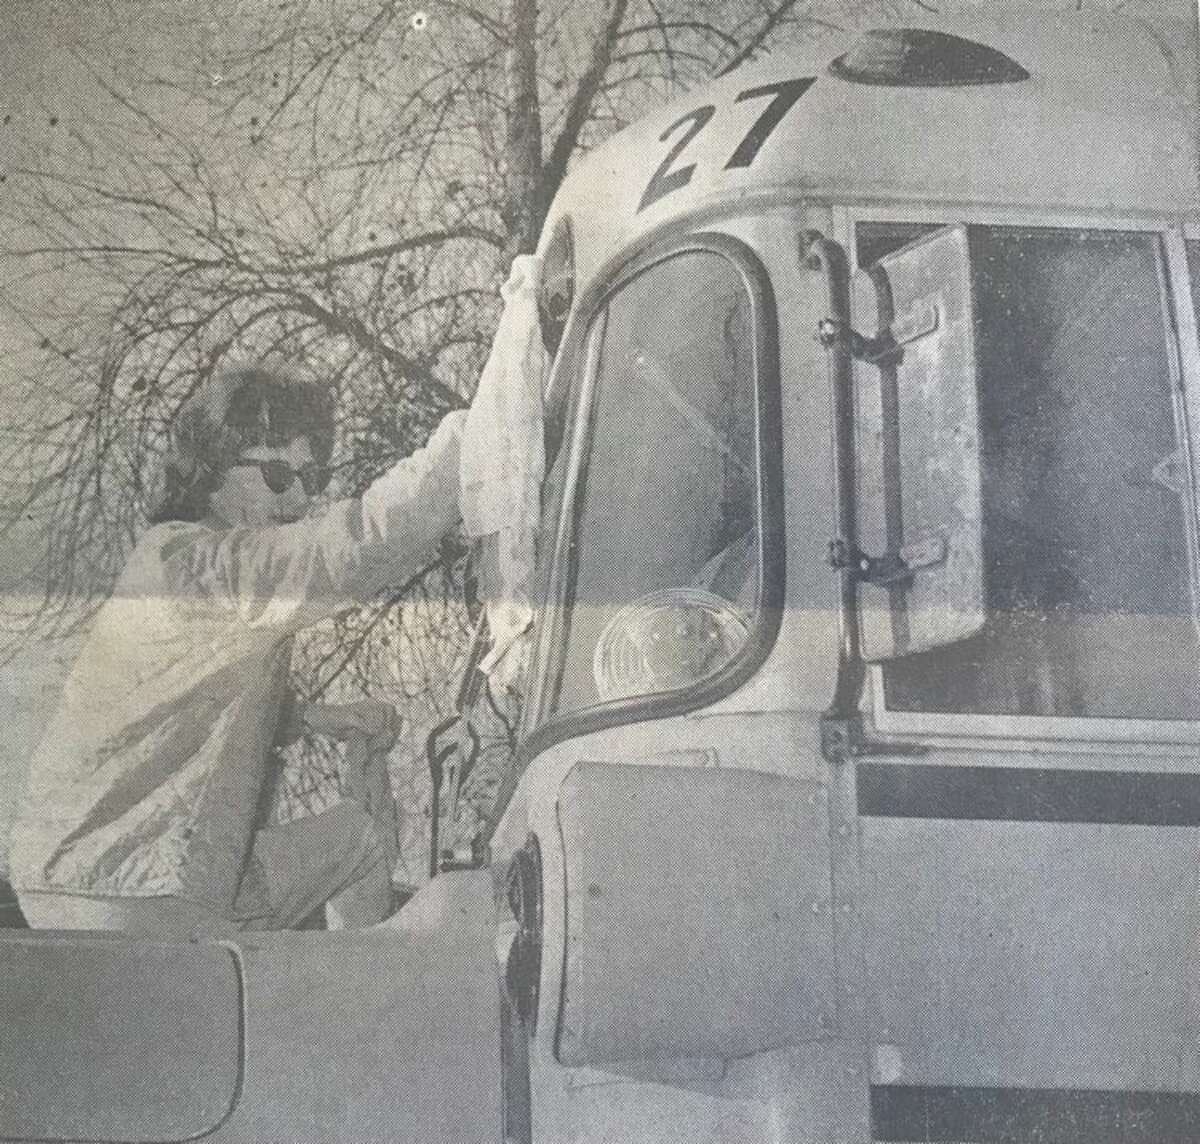 Mrs. Robert Randall climbs on the hood of her bus to polish its wide-view windows while waiting her turn at the gasoline pumps at Midland Public Schools bus garage. November 1963